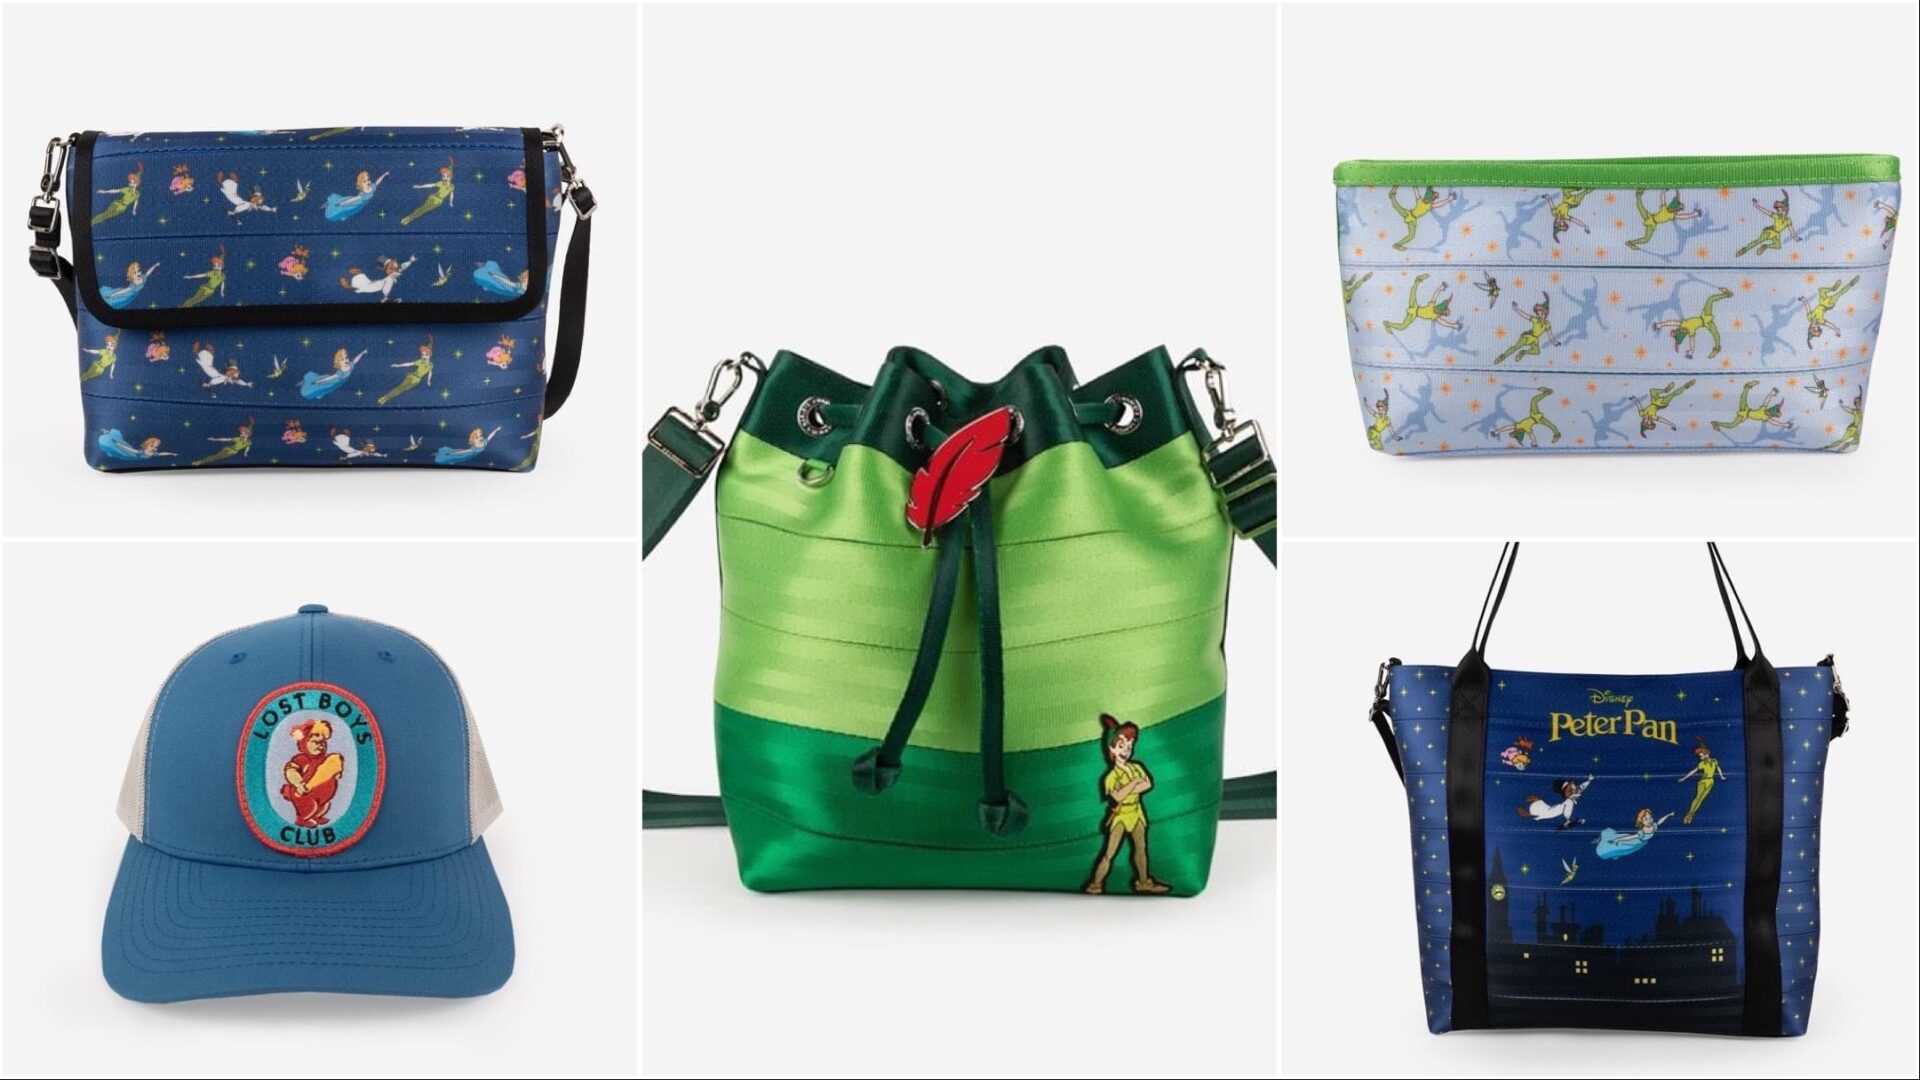 Fly Off To Neverland With The New Peter Pan Harveys Collection!